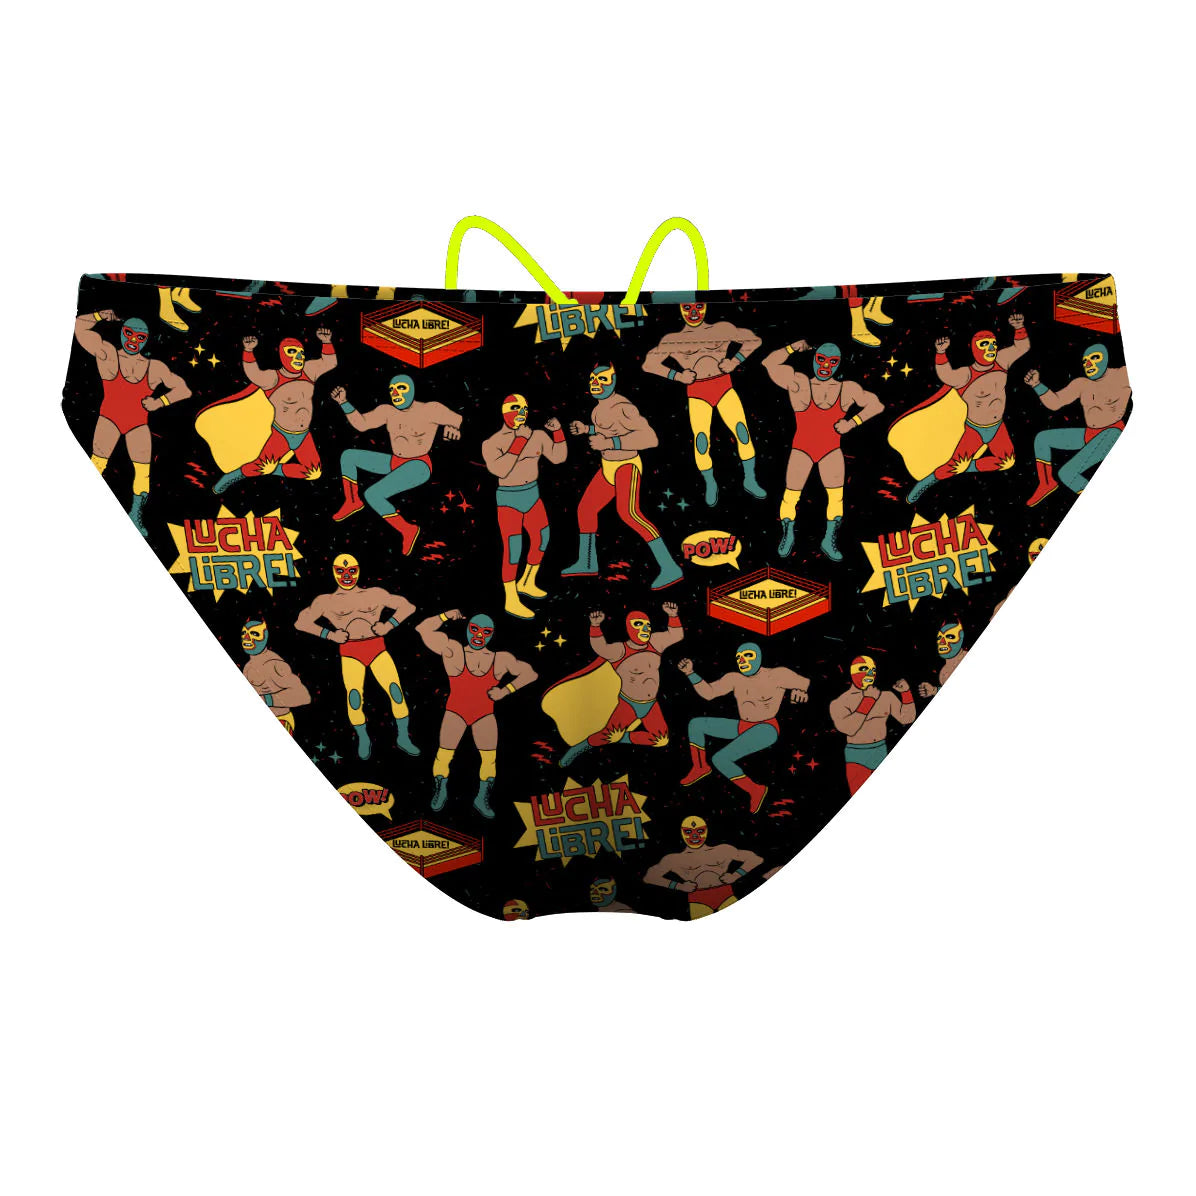 Lucha Libre - Waterpolo Brief Swimsuit